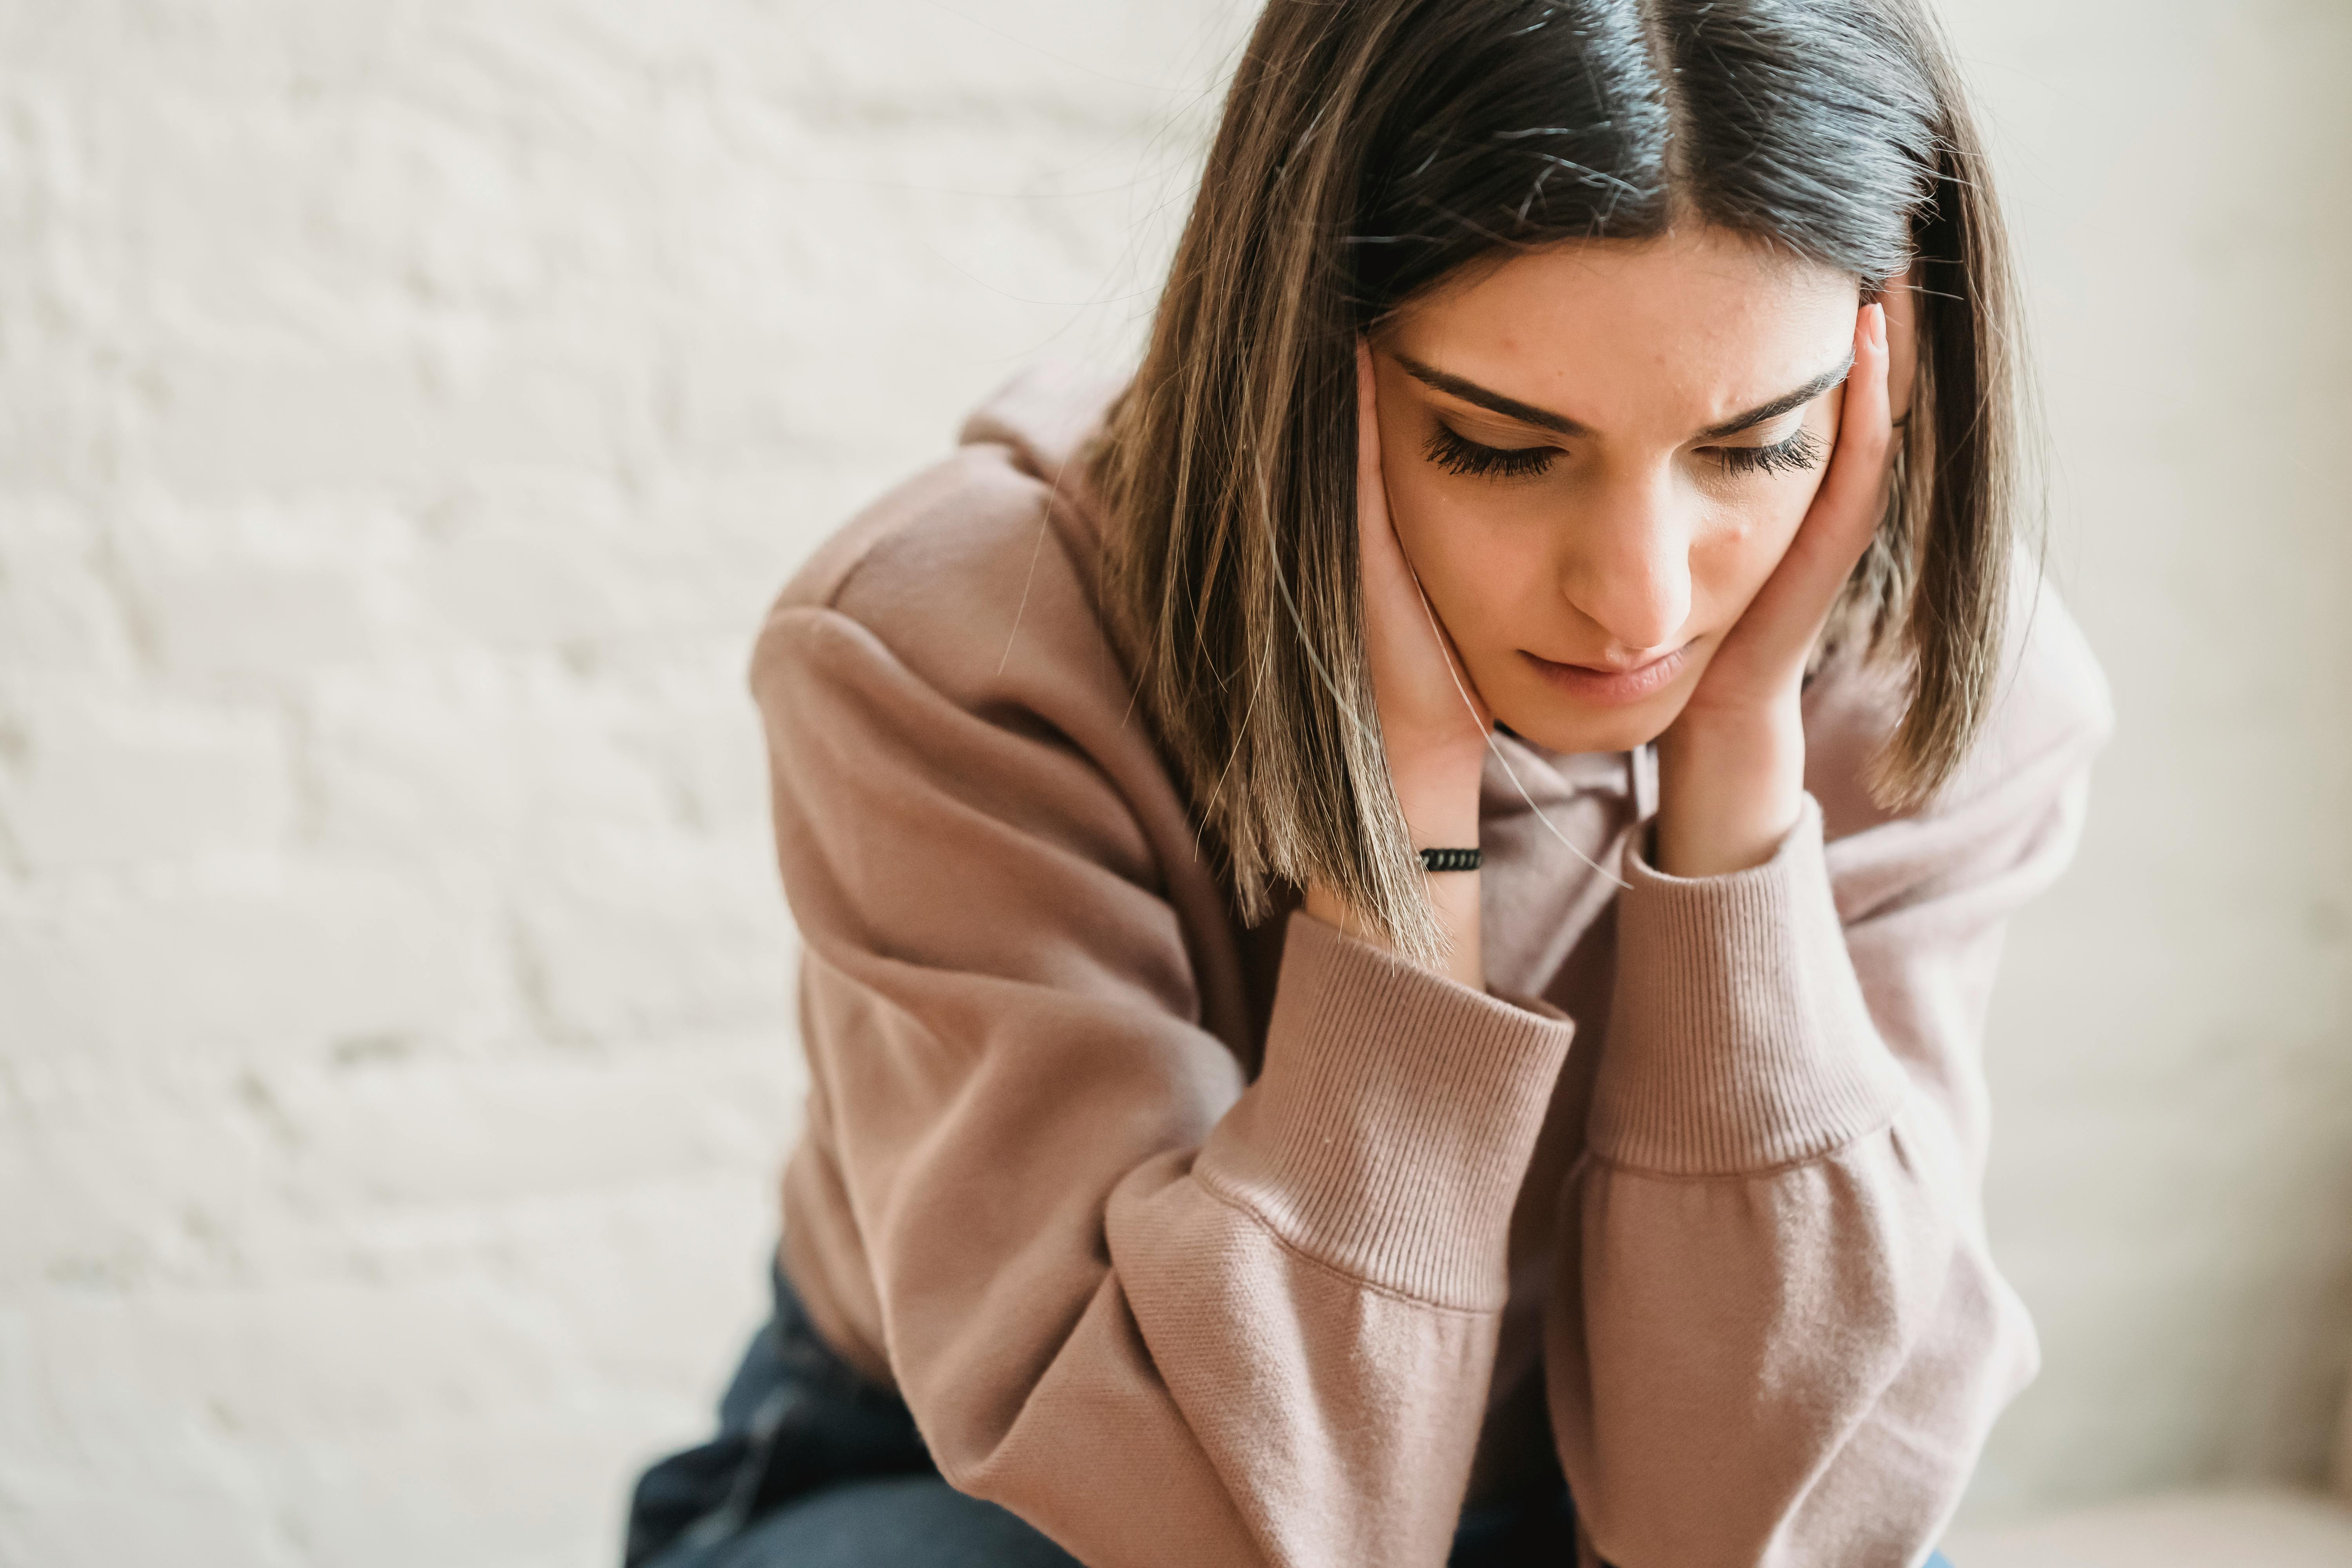 A sad woman sitting in a room | Source: Pexels